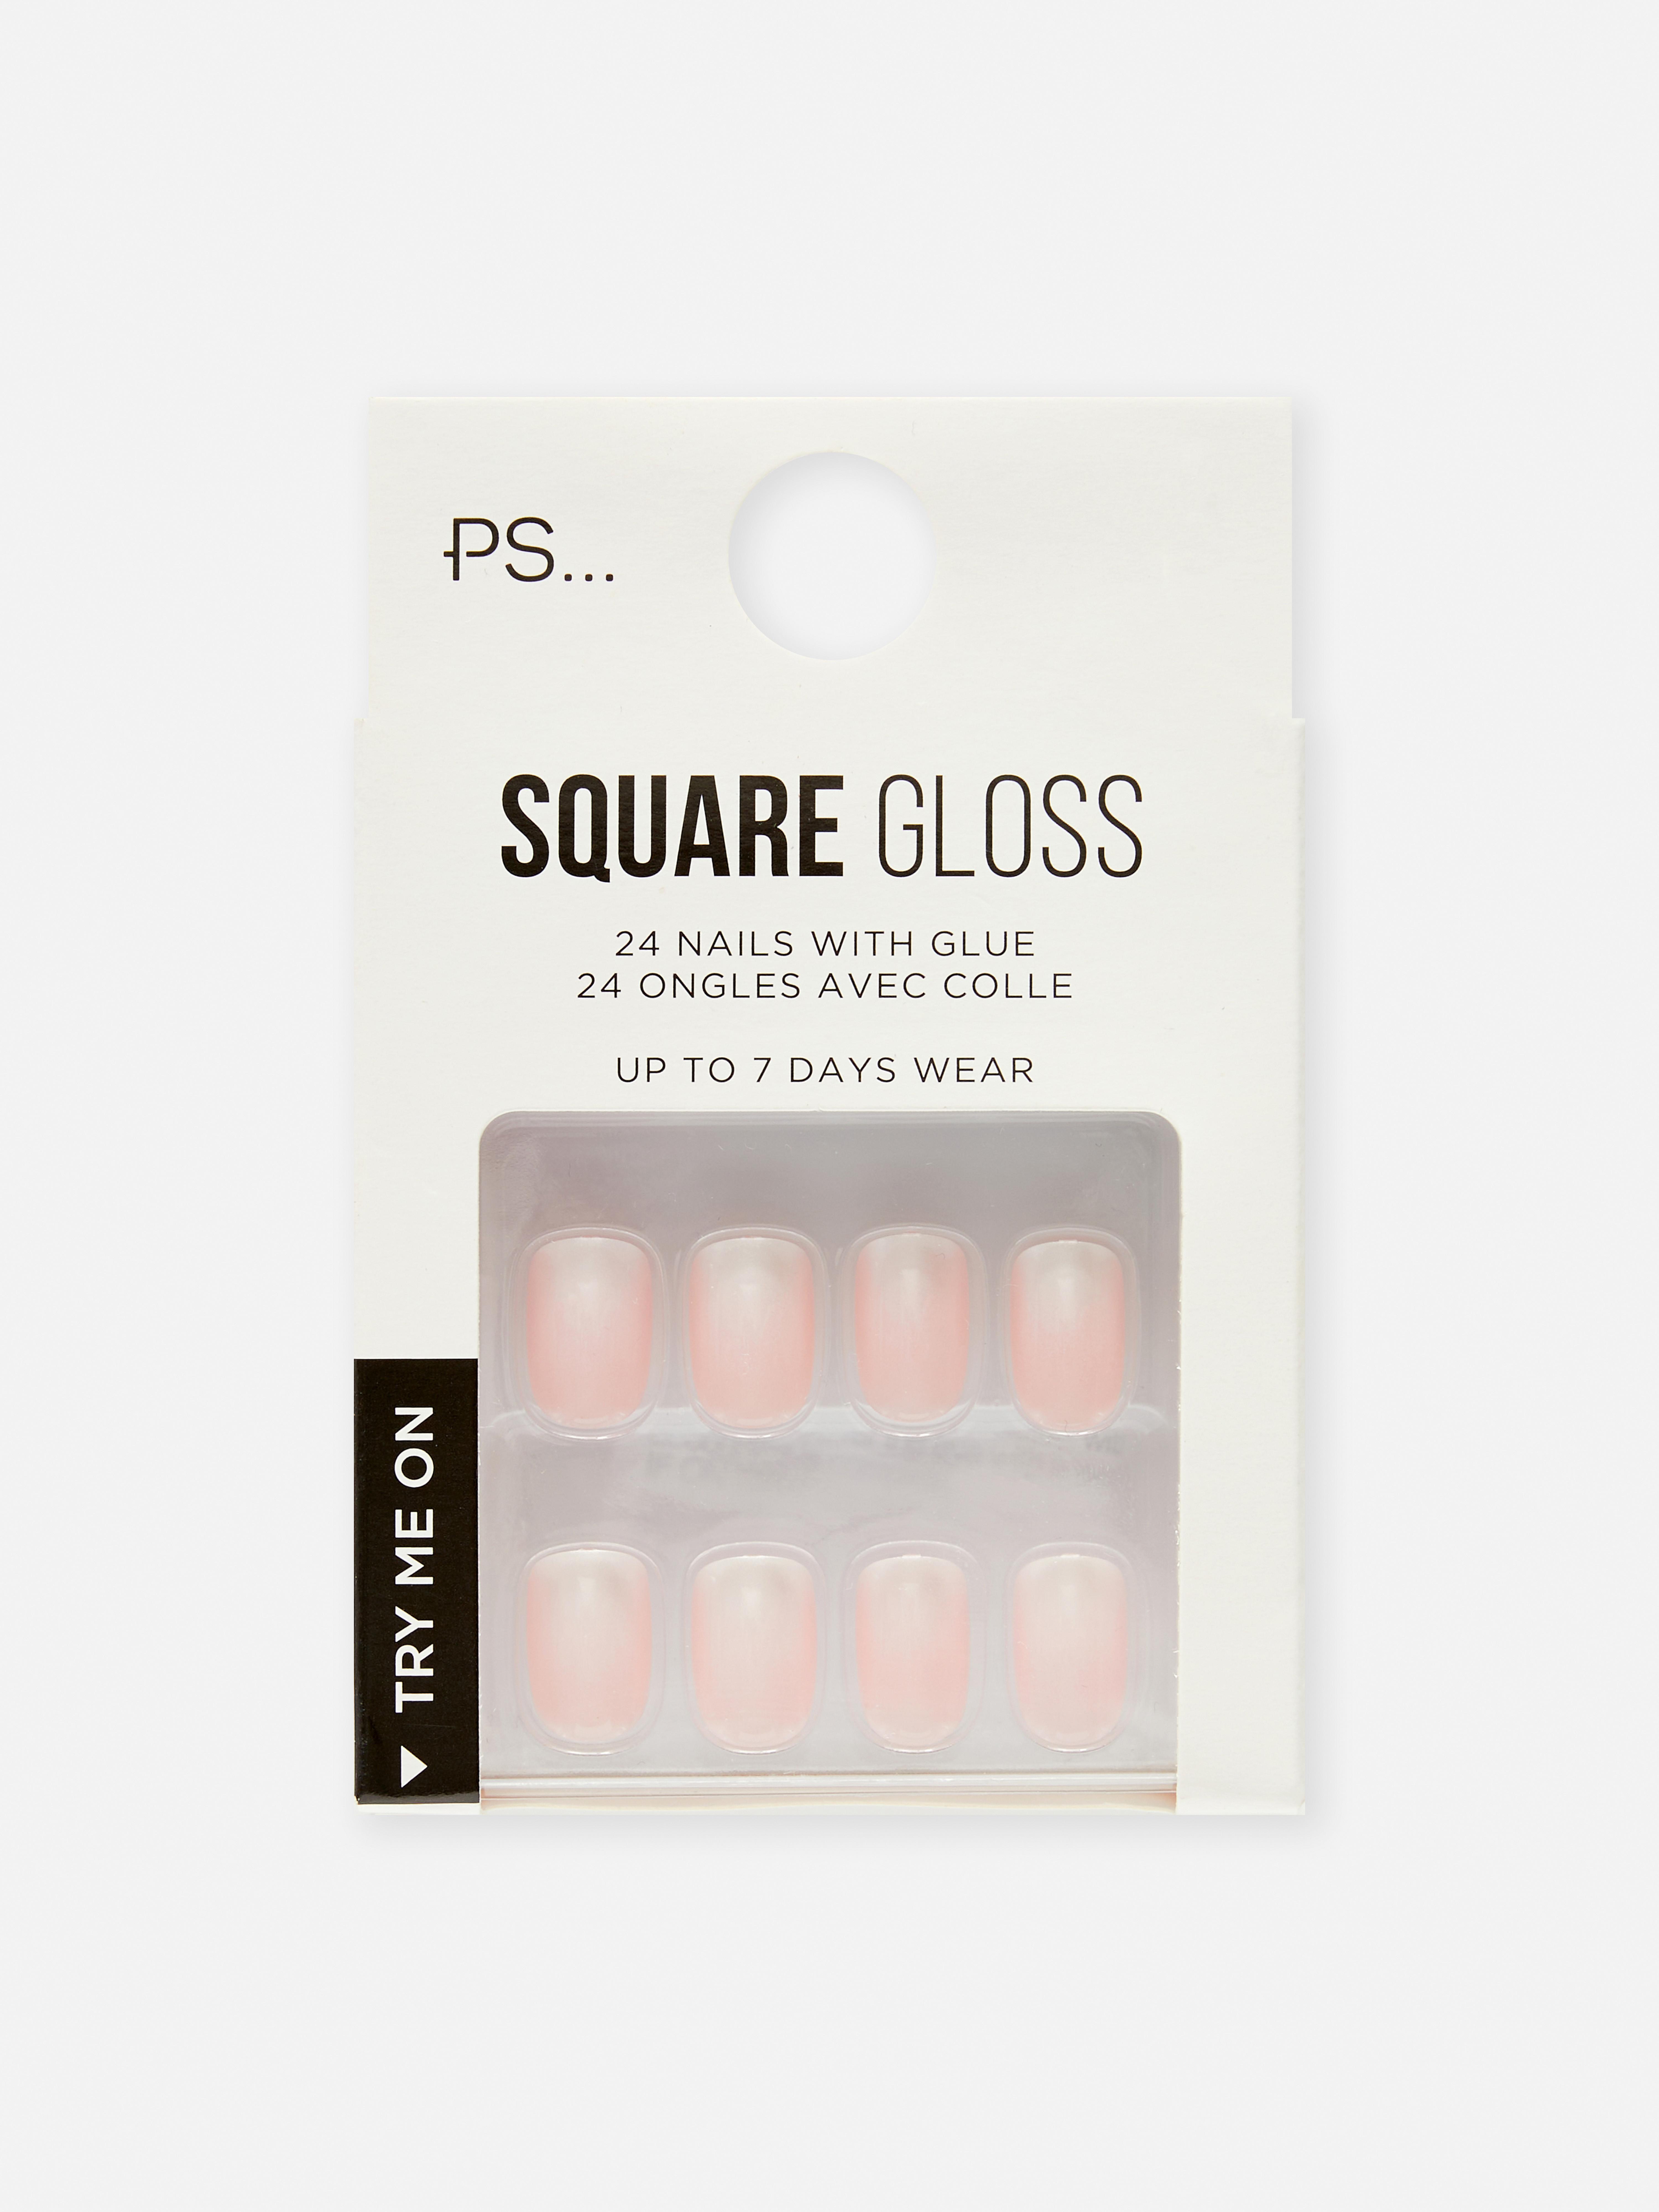 PS... Faux ongles carrés avec French manucure glossy PS...